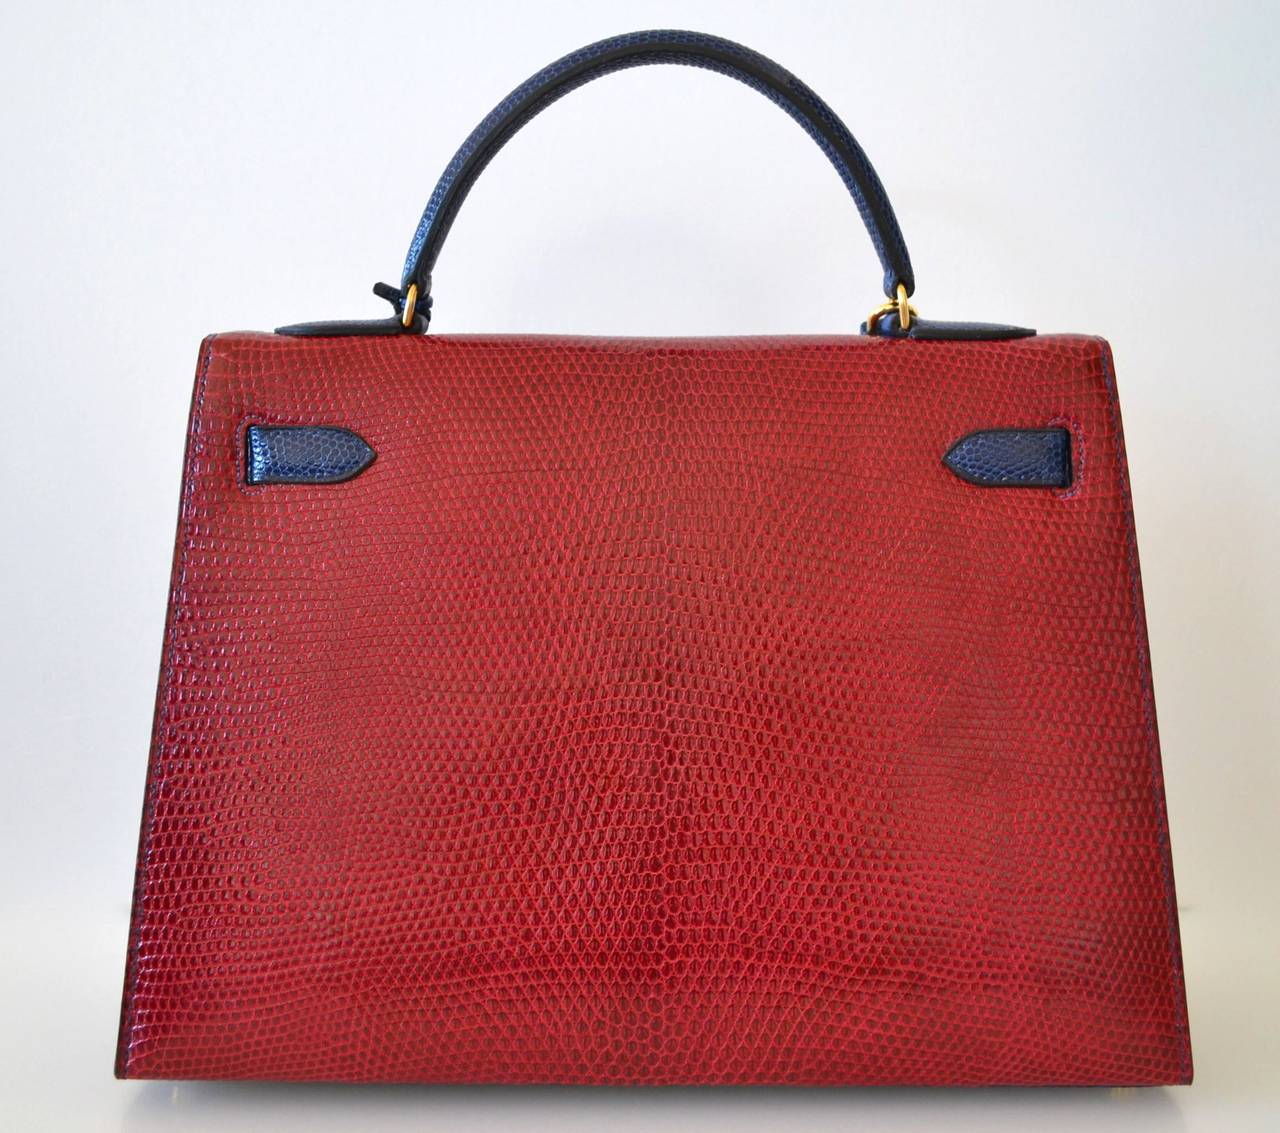 Hermes Kelly 32 Lizard Tricolore
 
Lizard skin
Vert Foret – Bleu Saphir – Rouge Hermes
The bag is lined with Rouge H chevre leather.
 
This bag is in very good condition 7/10
This item is in very good condition with gentle few signs of use.